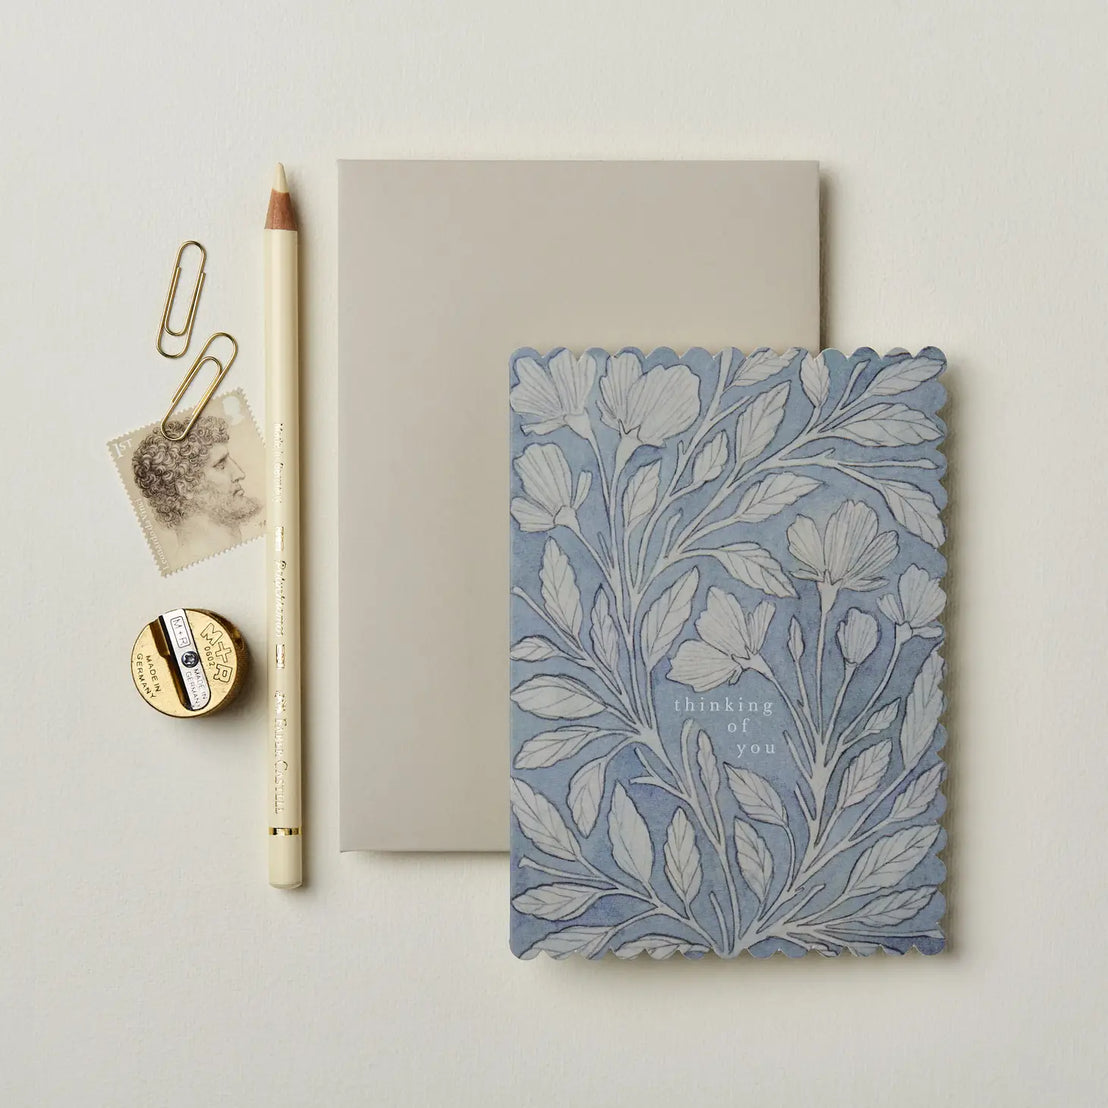 Flora Thinking of You, Wanderlust Paper Co.